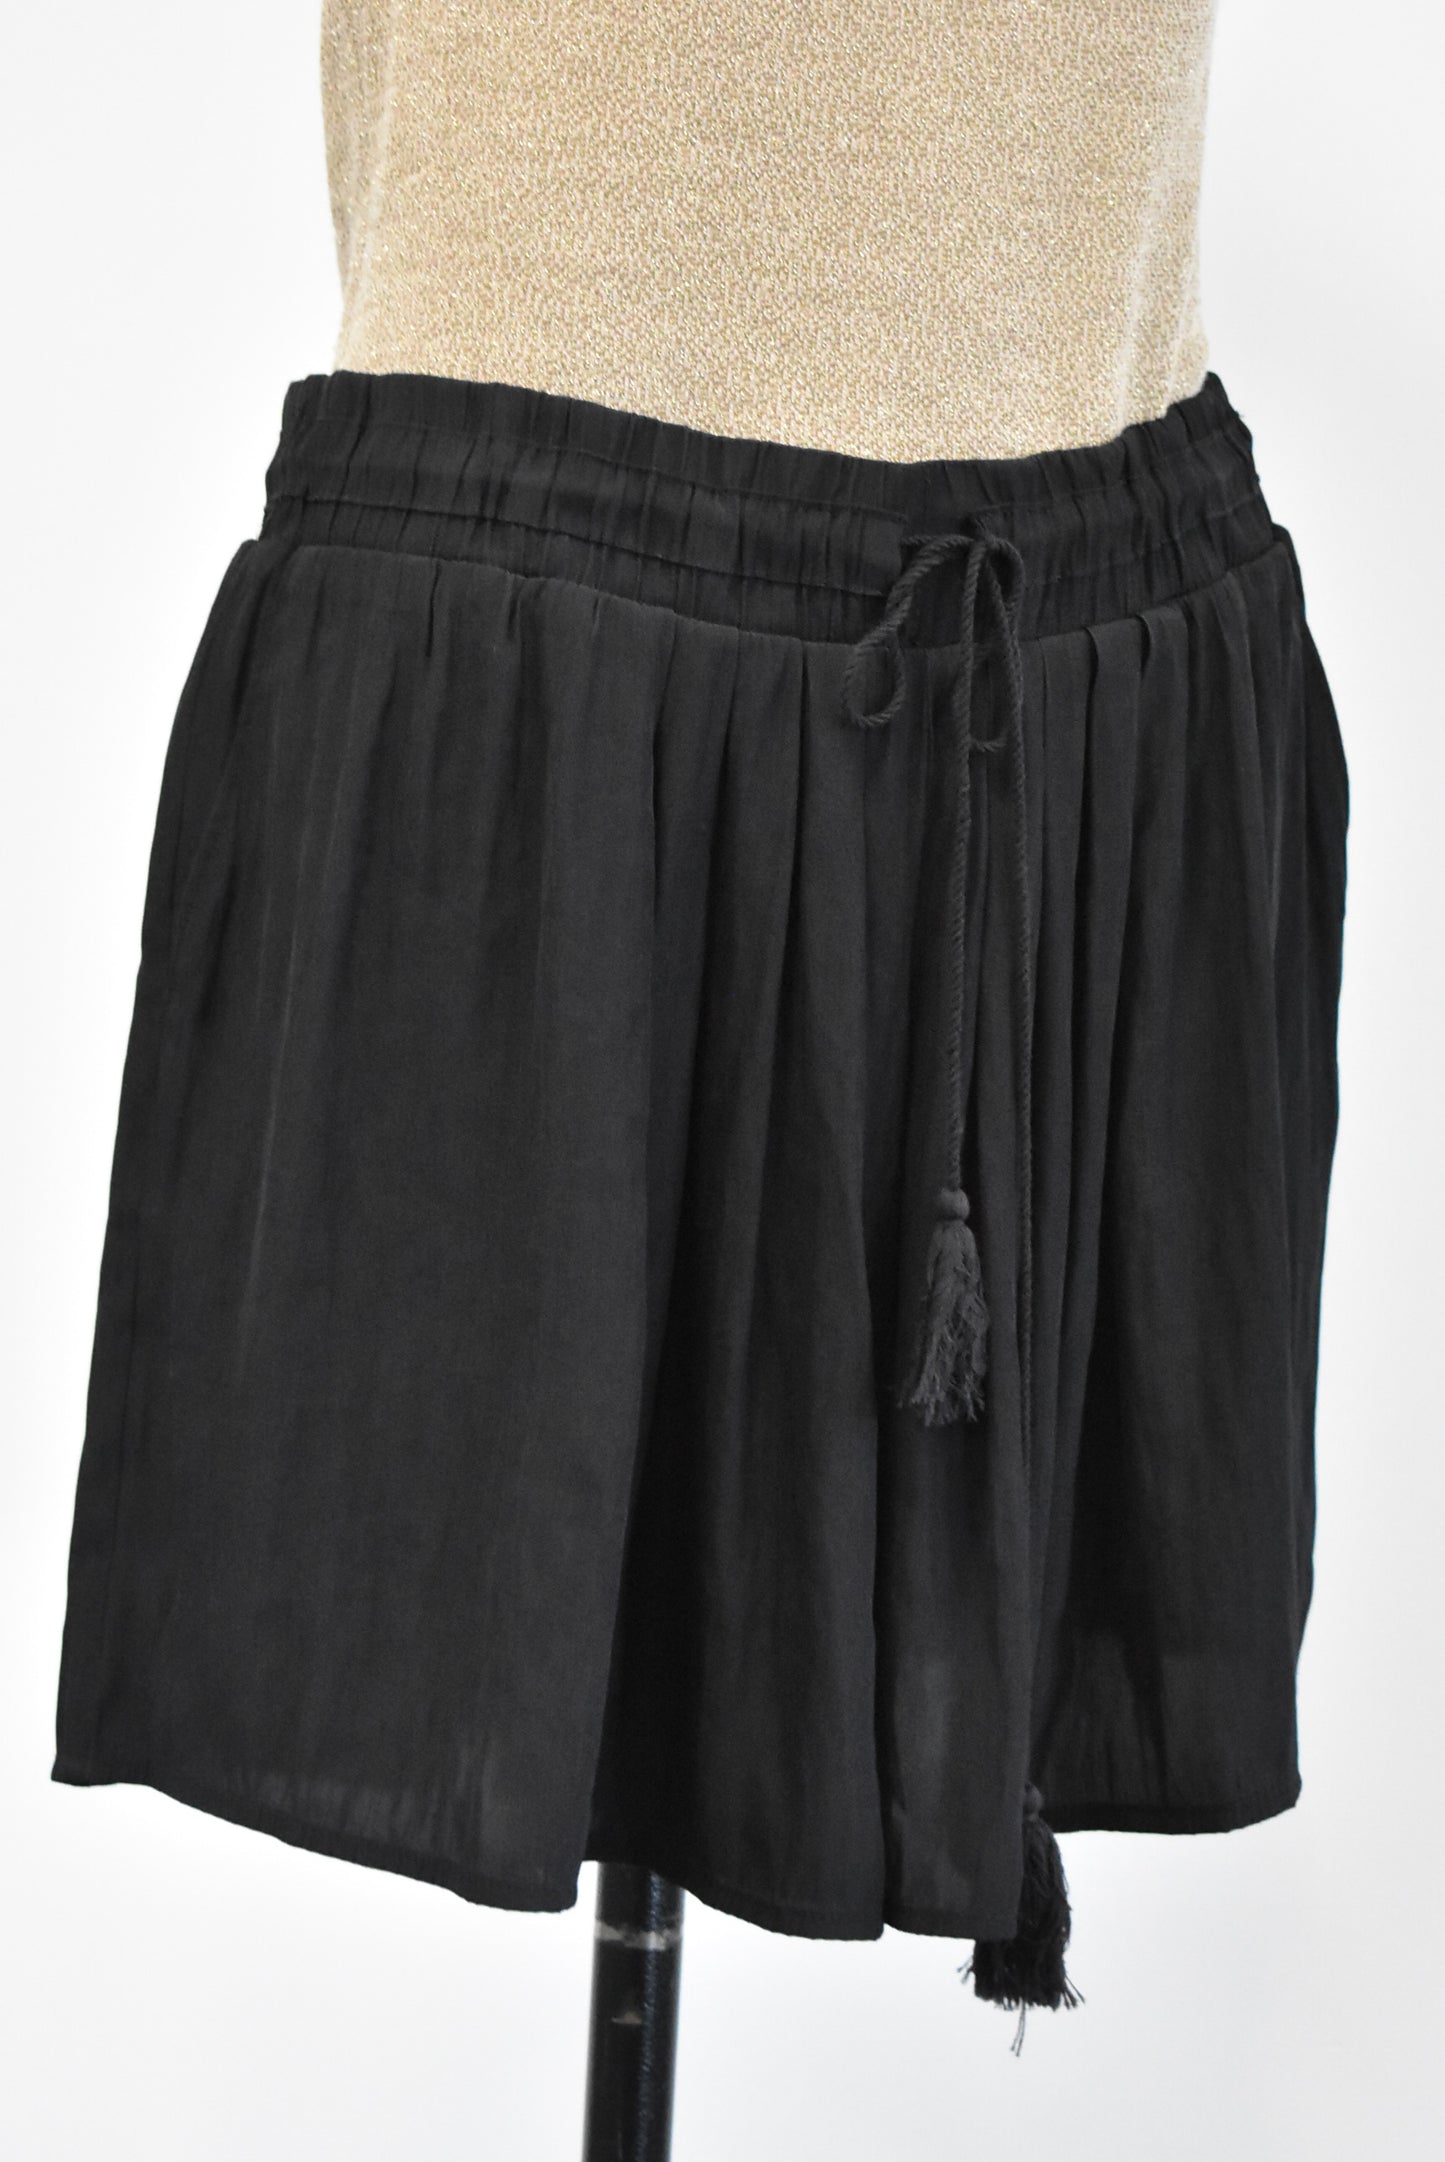 Country Road black shorts, 10